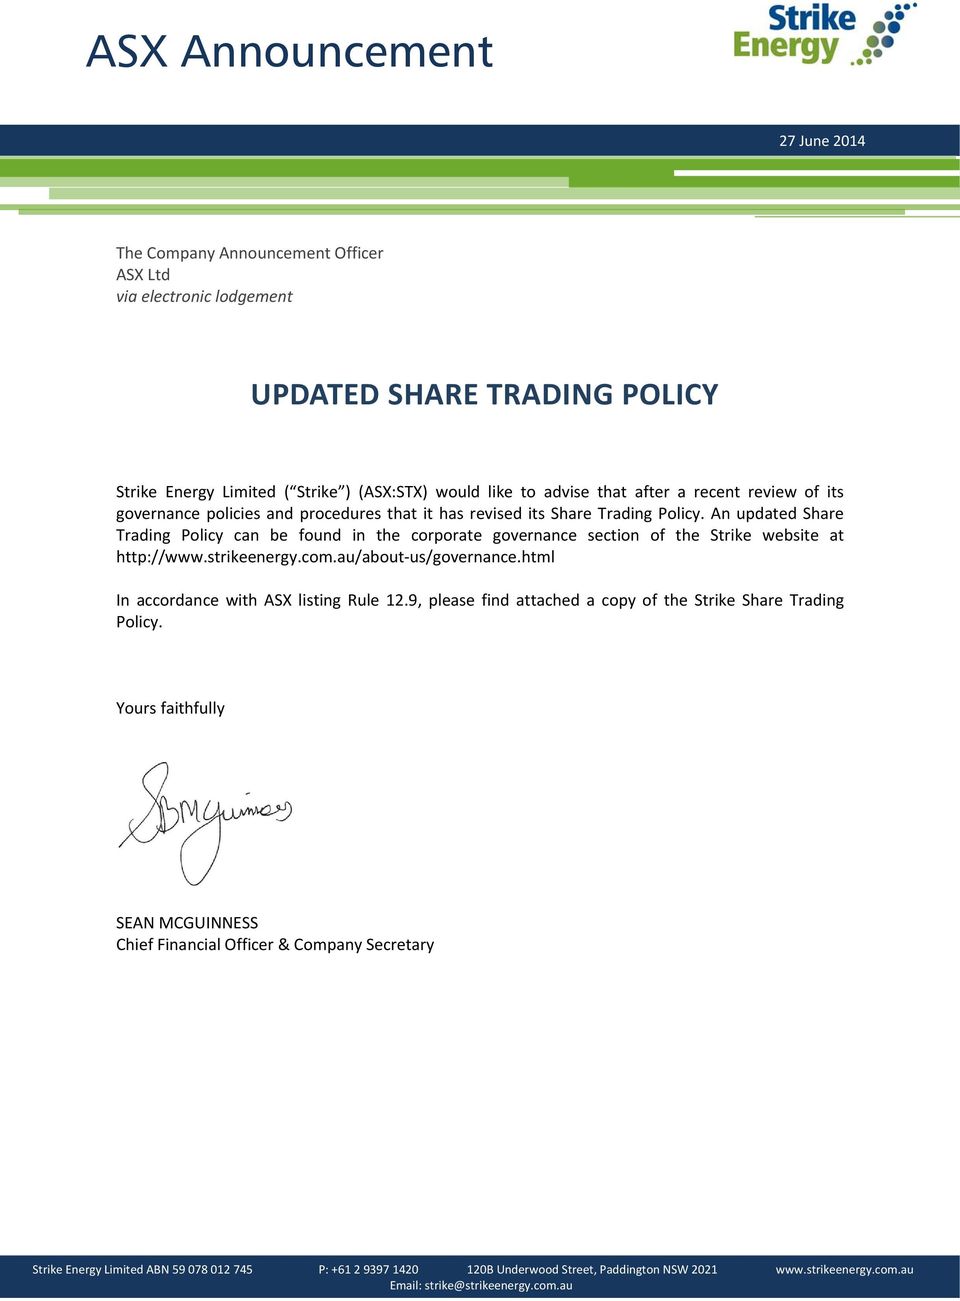 An updated Share Trading Policy can be found in the corporate governance section of the Strike website at http://www.strikeenergy.com.au/about us/governance.